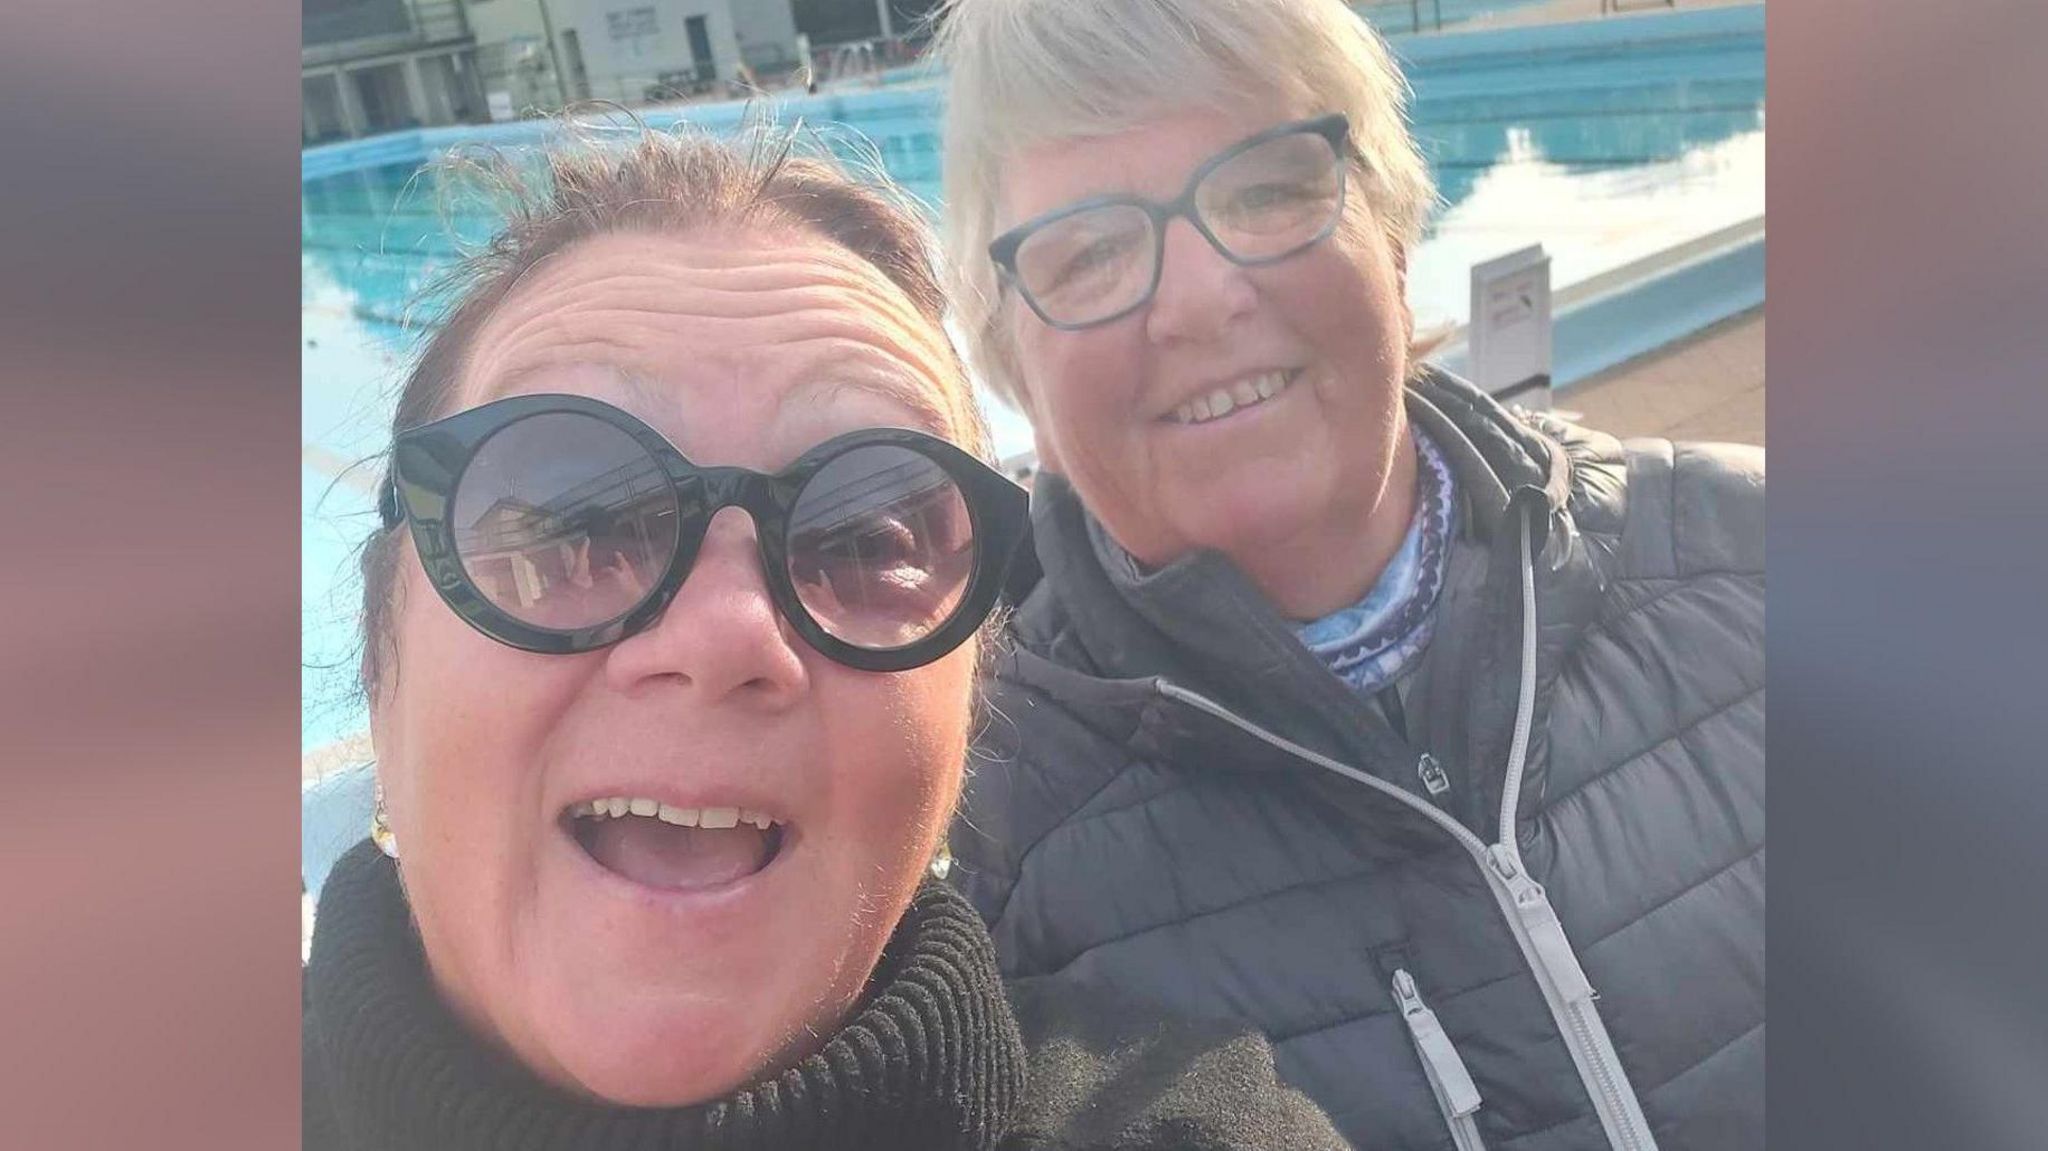 Vicky and her friend Jan's selfie in front of the Lido